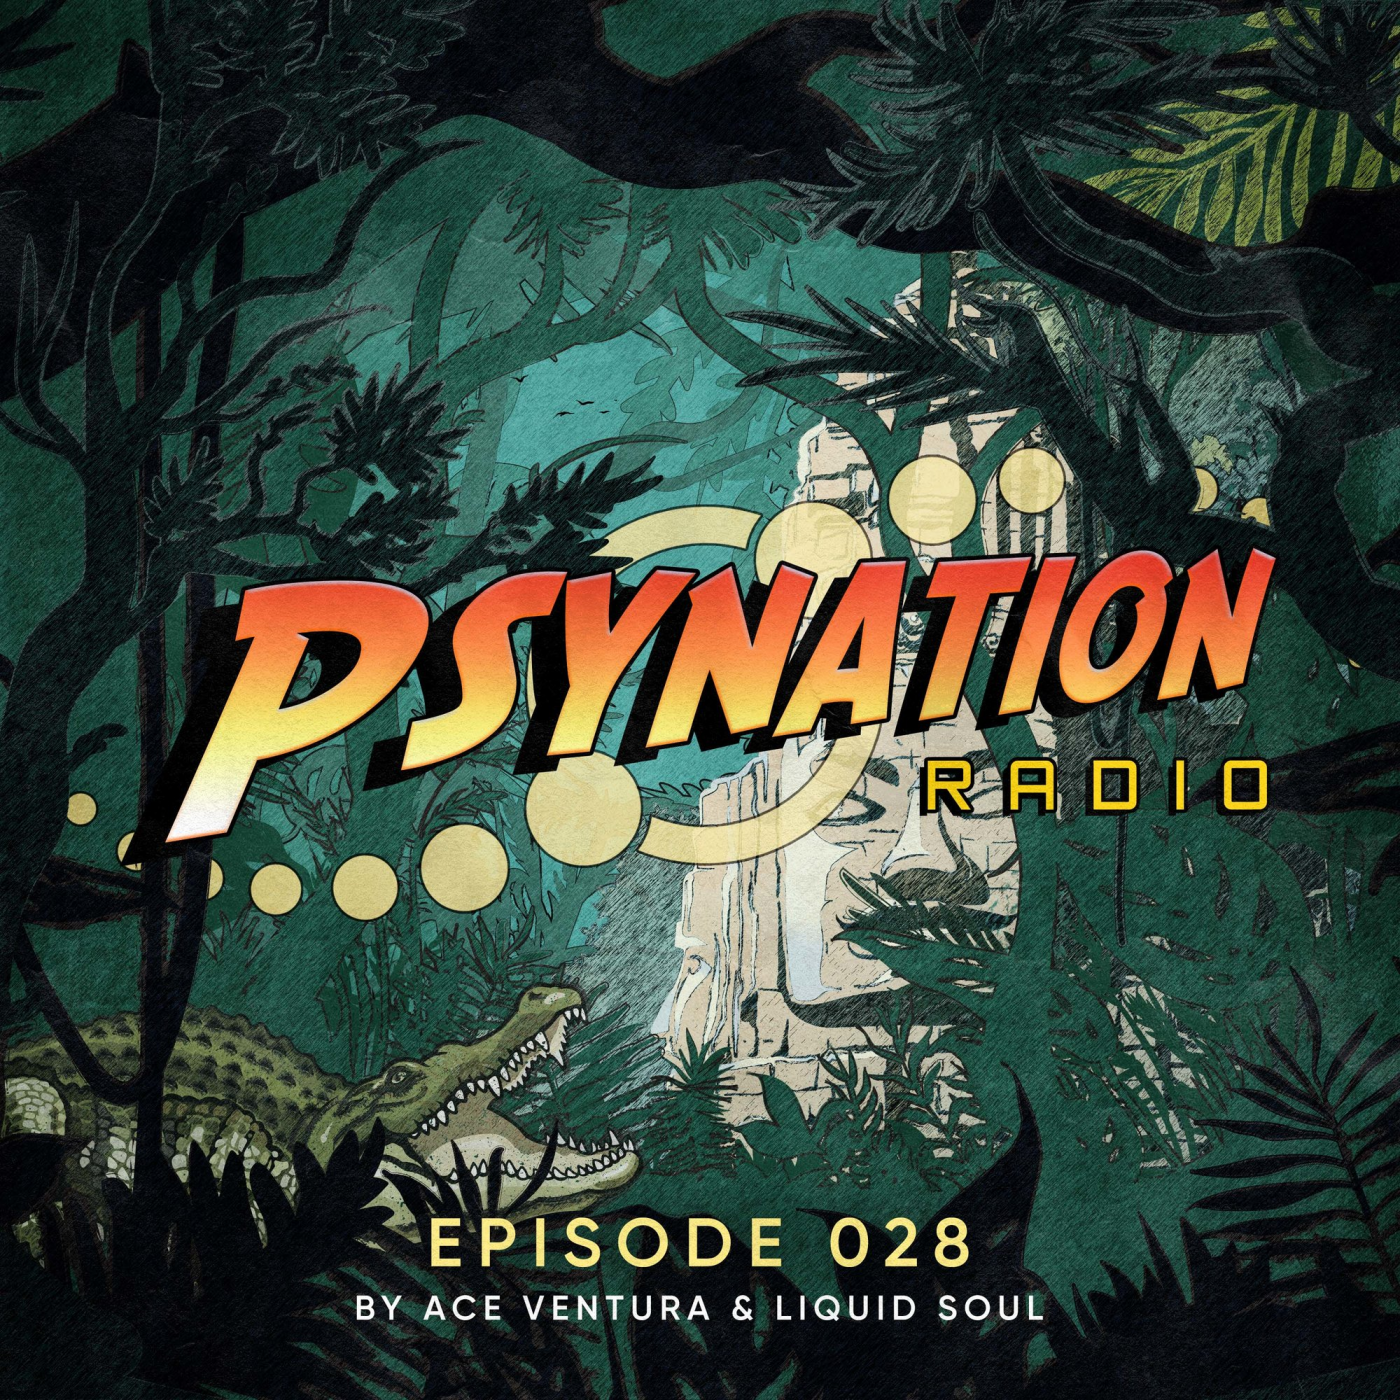 Psy-Nation Radio 028 | incl. Freedom Fighters Mix [Ace Ventura & Liquid Soul]